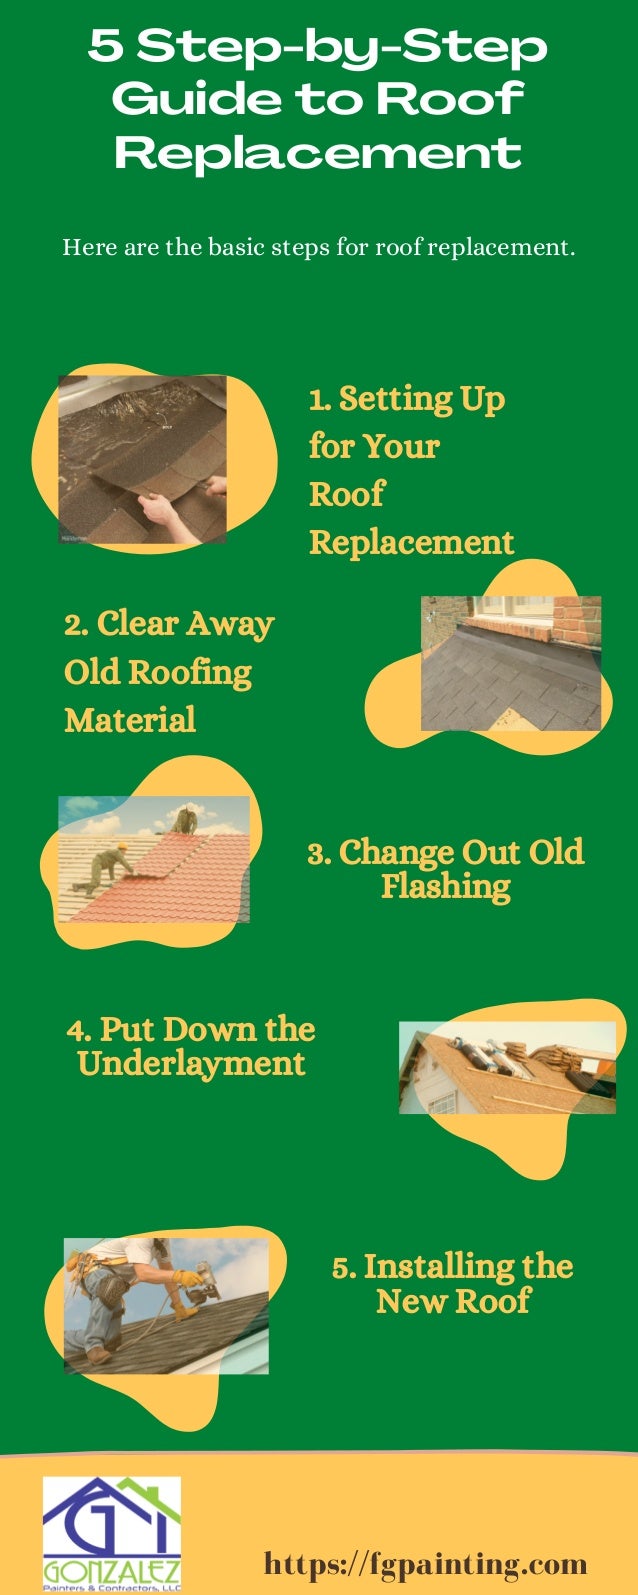 4. Put Down the
Underlayment
5 Step-by-Step
Guide to Roof
Replacement
Here are the basic steps for roof replacement.
2. Clear Away
Old Roofing
Material
5. Installing the
New Roof


3. Change Out Old
Flashing
1. Setting Up
for Your
Roof
Replacement
https://fgpainting.com
 